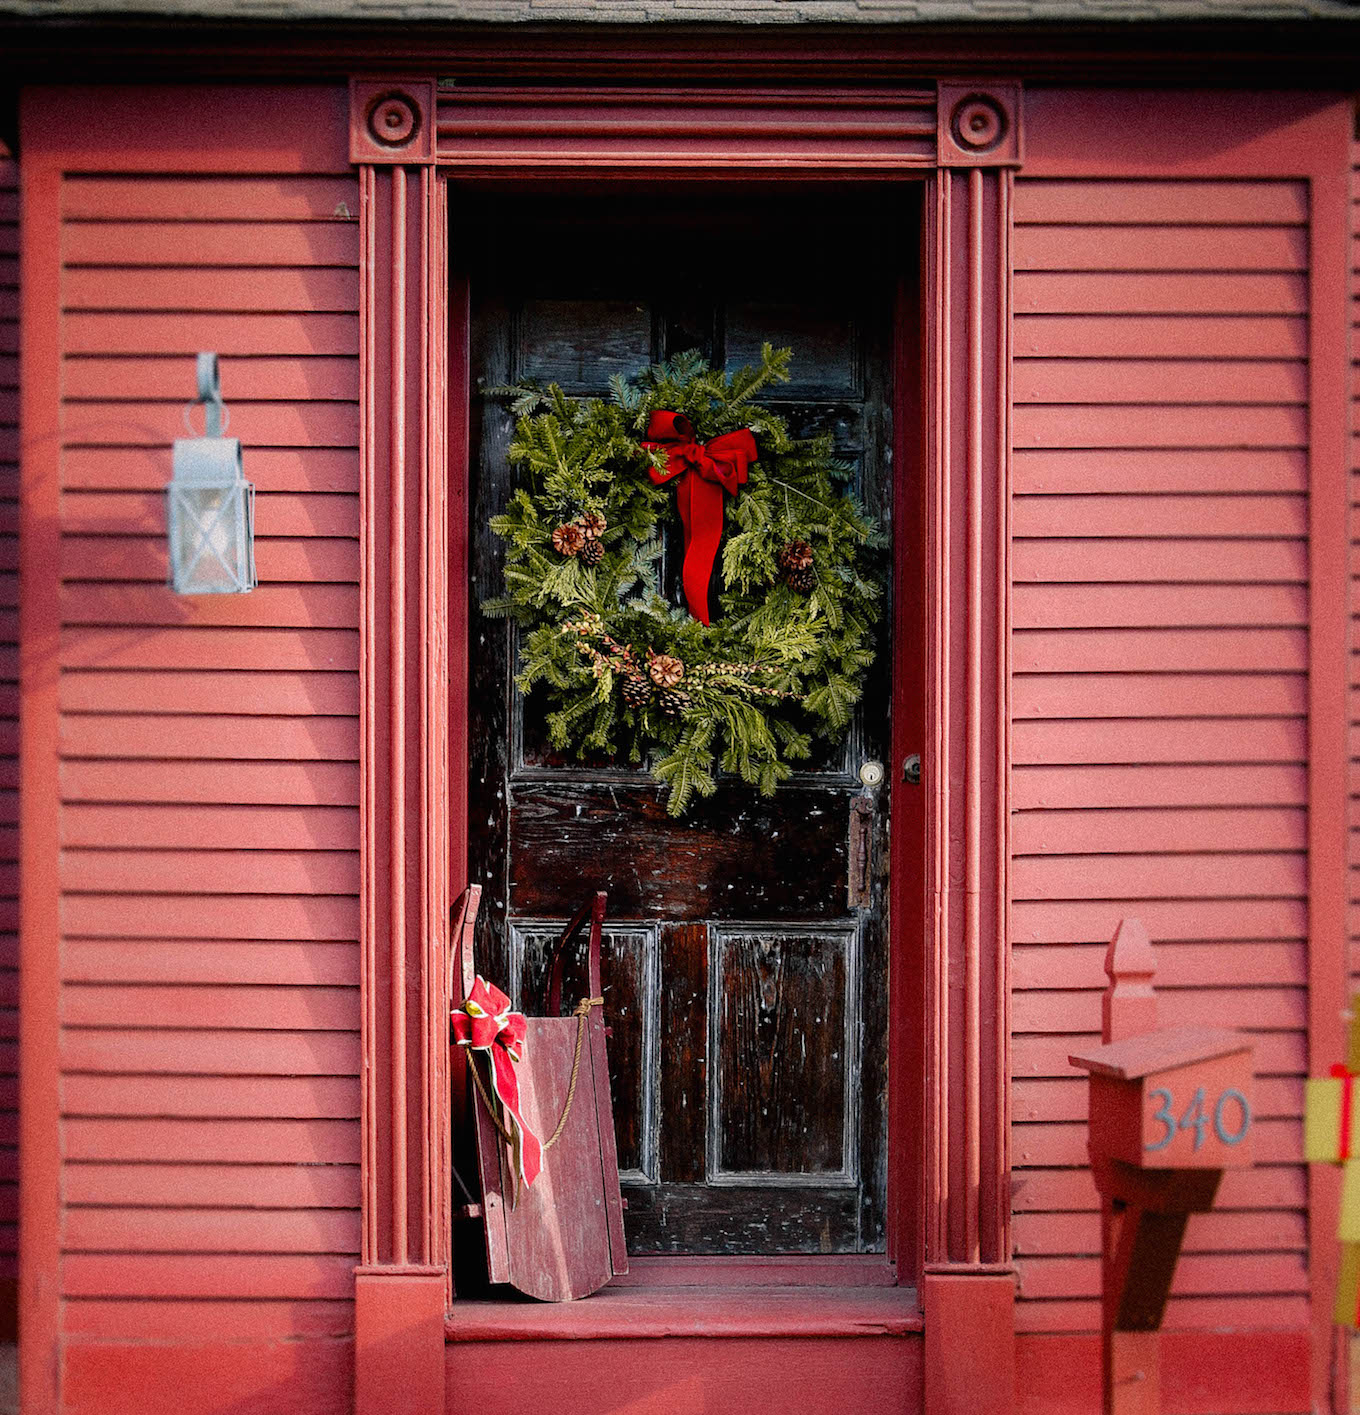 Historic Homes of Connecticut at Christmas | The Coastal Confidence by Aubrey Yandow